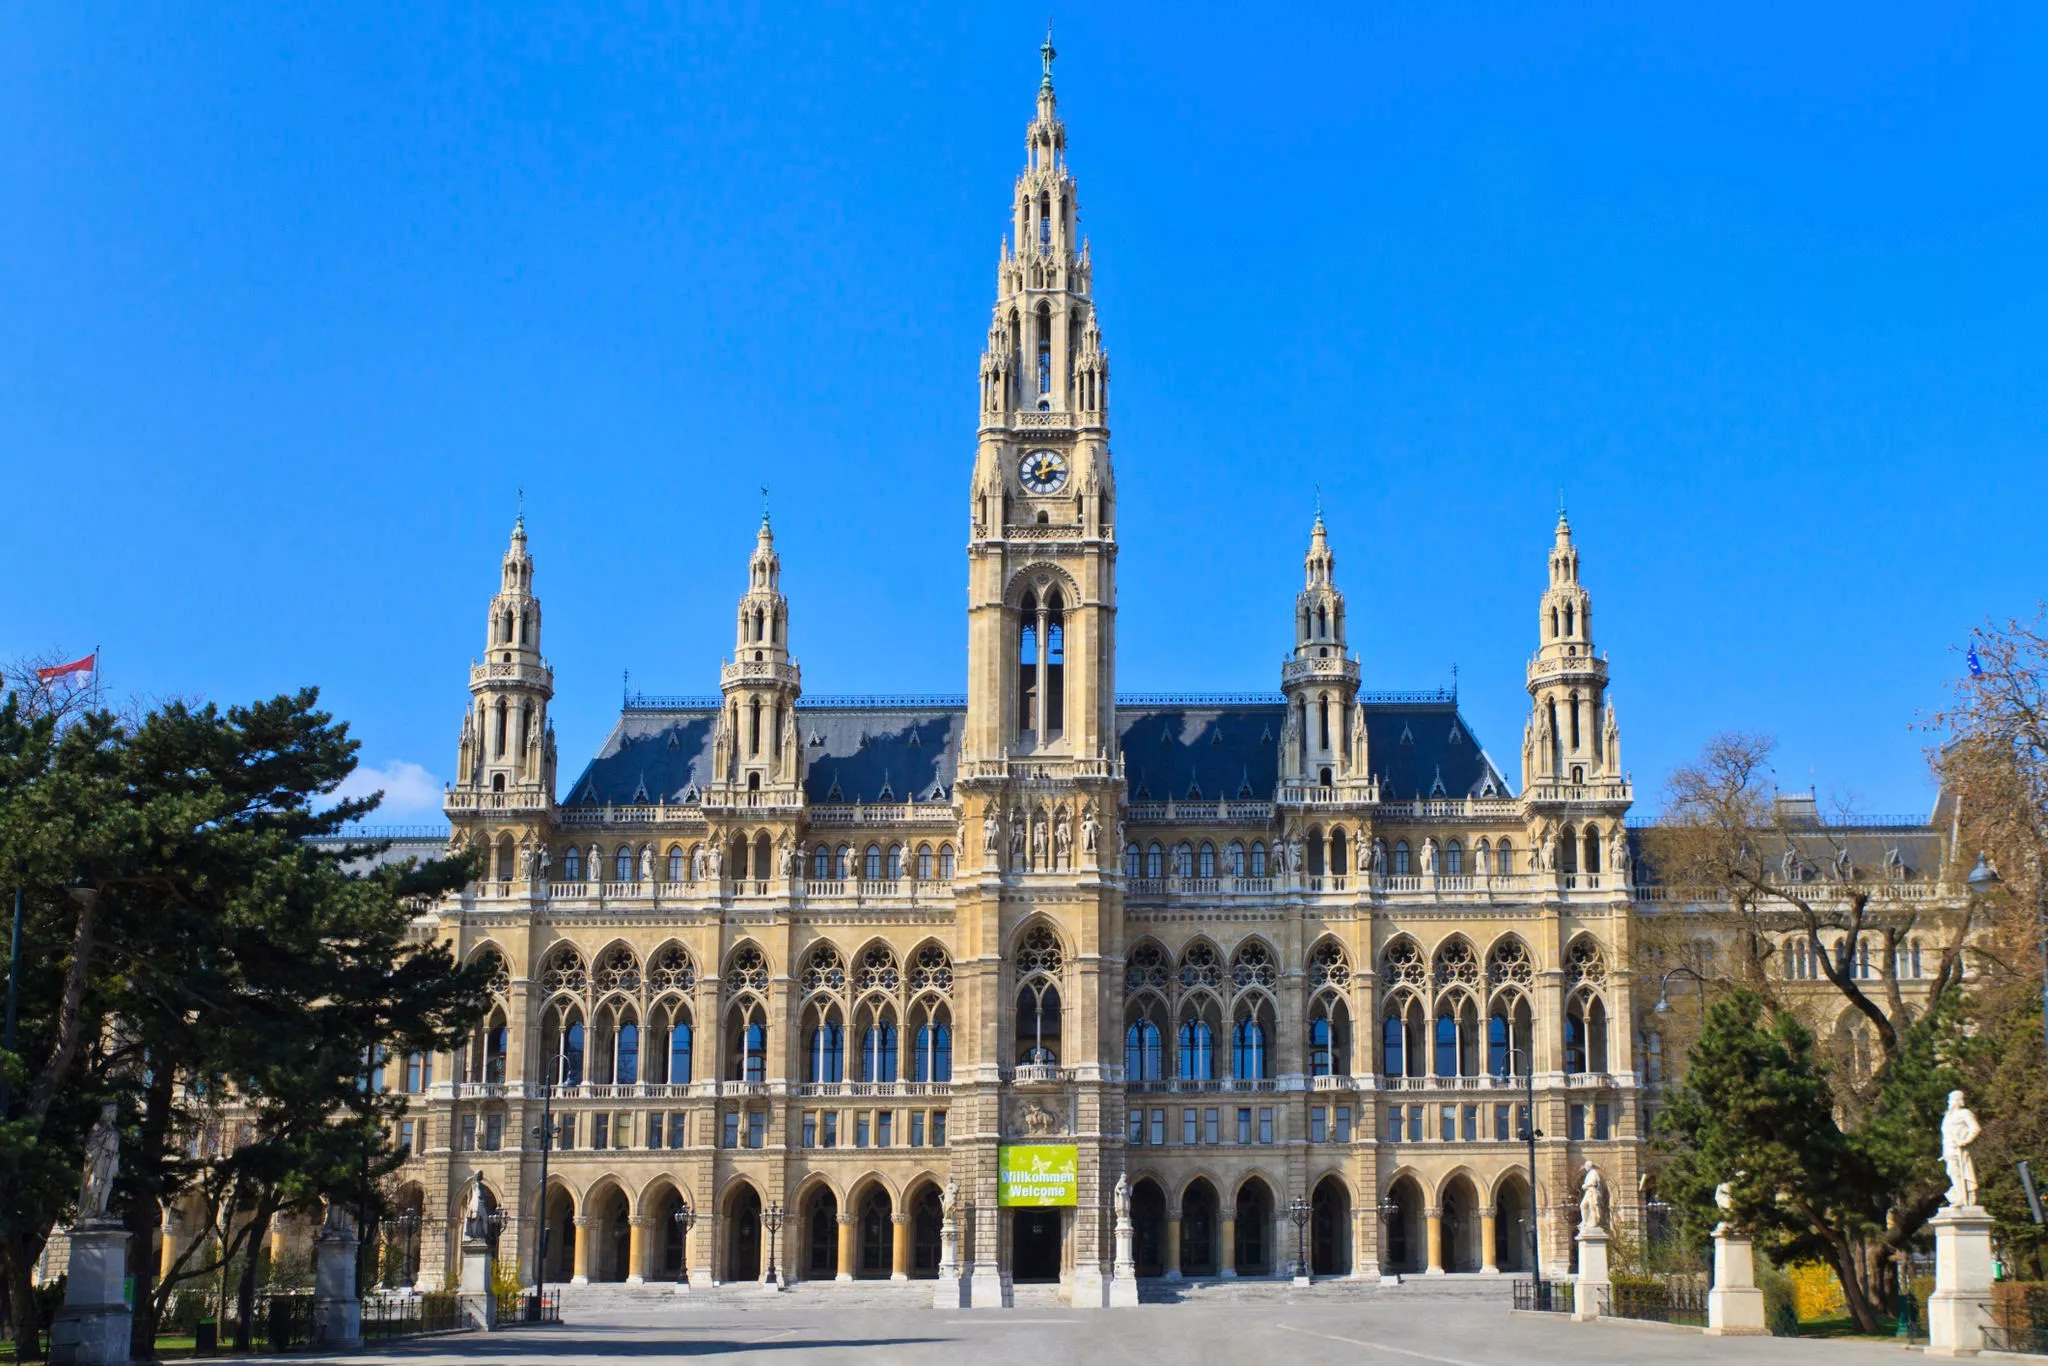 Vienna City Hall in Austria, Europe | Architecture - Rated 3.8